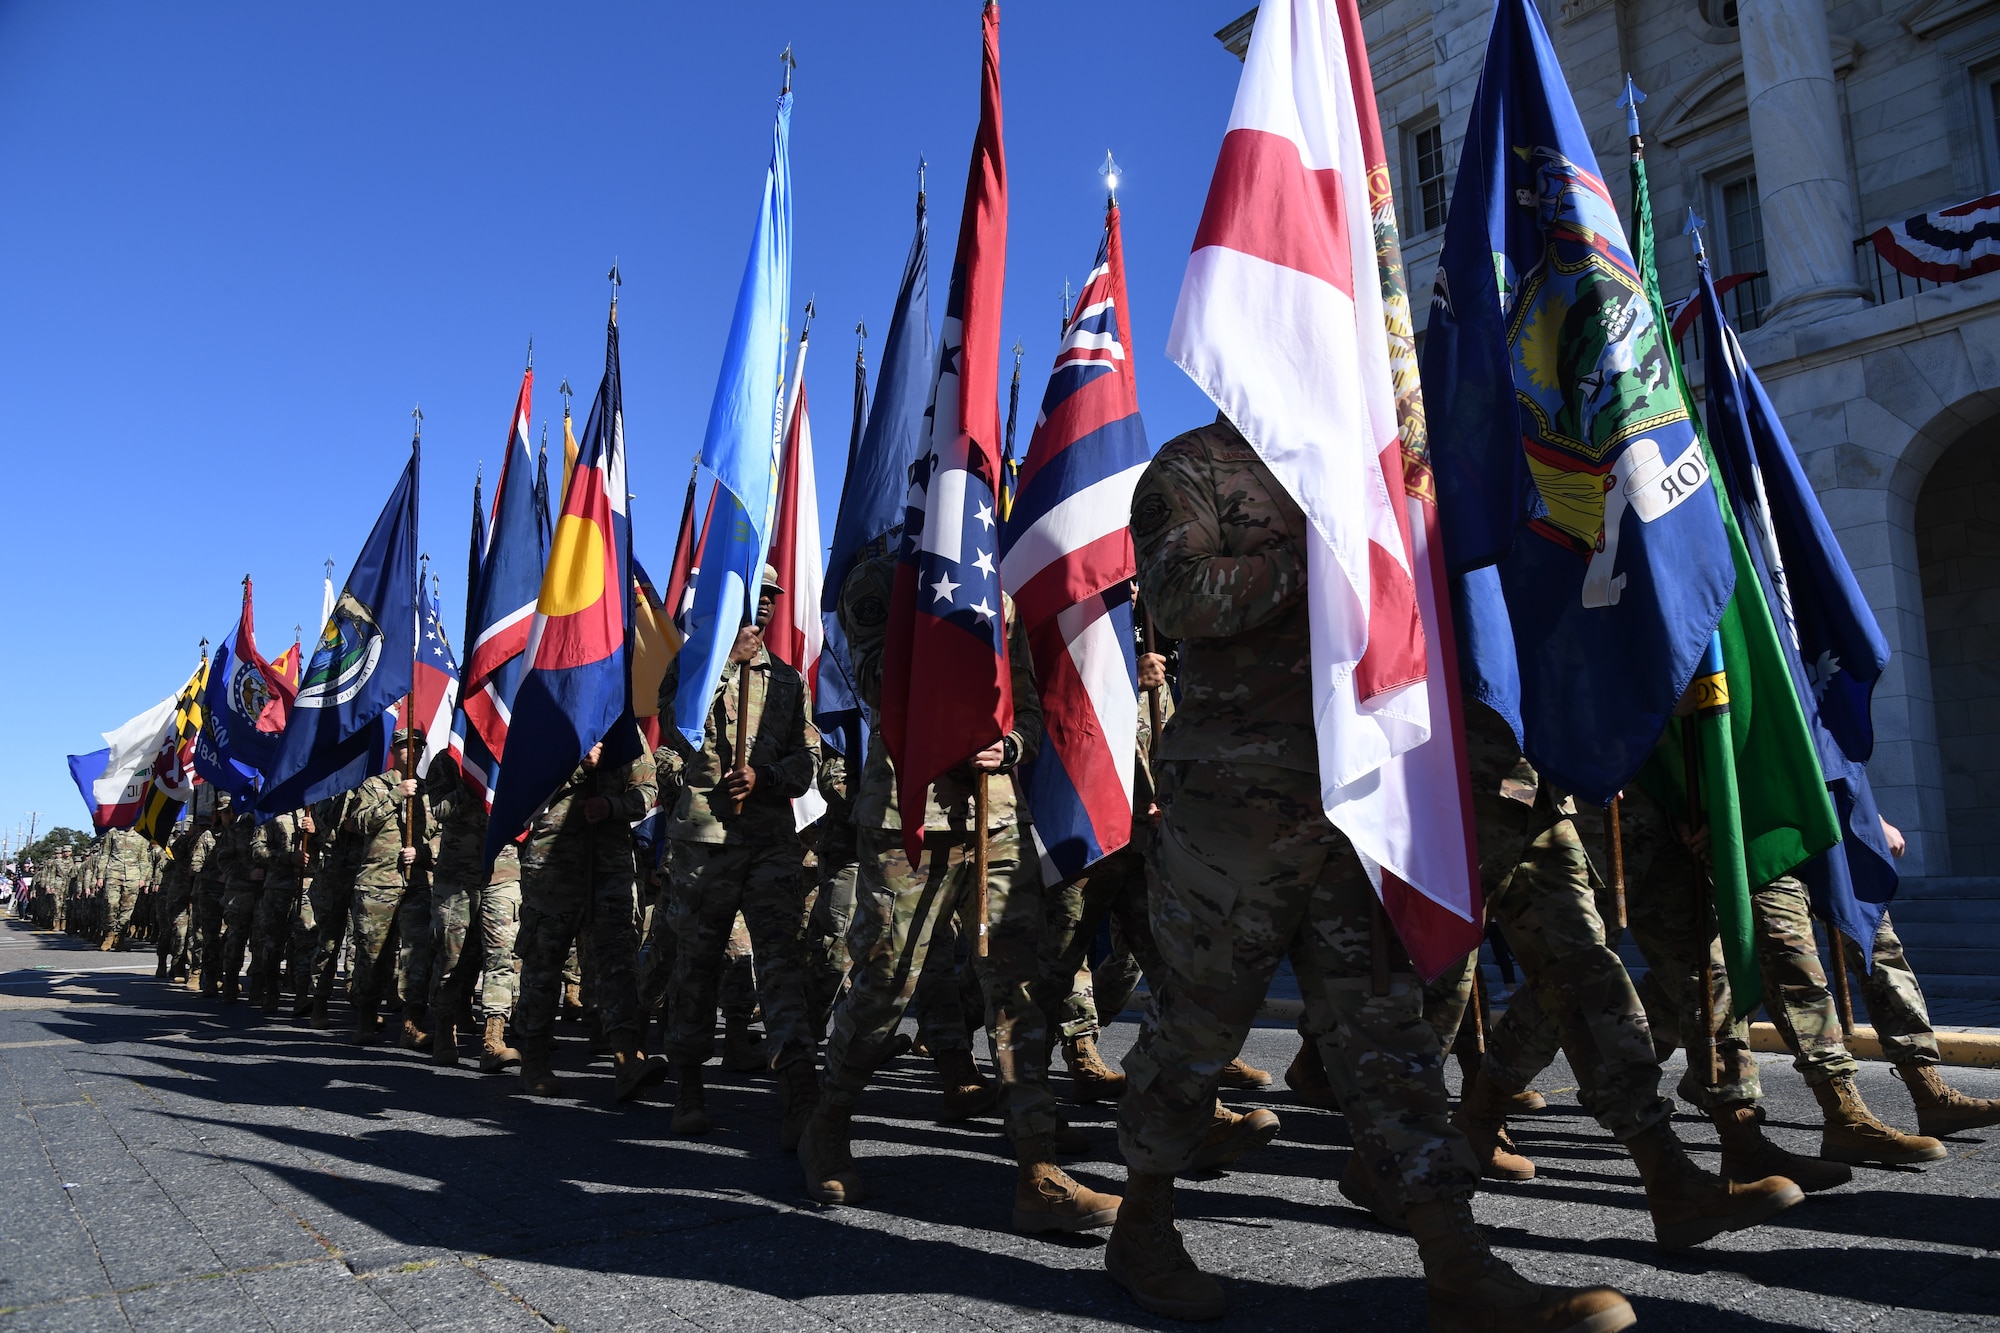 Airmen from the 81st Training Group carrying the 50 state flags march in the 21st Annual Gulf Coast Veterans Day Parade in Biloxi, Mississippi, Nov. 6, 2021. Keesler Air Force Base leadership, along with hundreds of Airmen, attended and participated in the parade in support of all veterans, past and present. More than 50 unique floats, marching bands and military units marched in the largest Veterans Day parade on the Gulf Coast. (U.S. Air Force photo by Kemberly Groue)